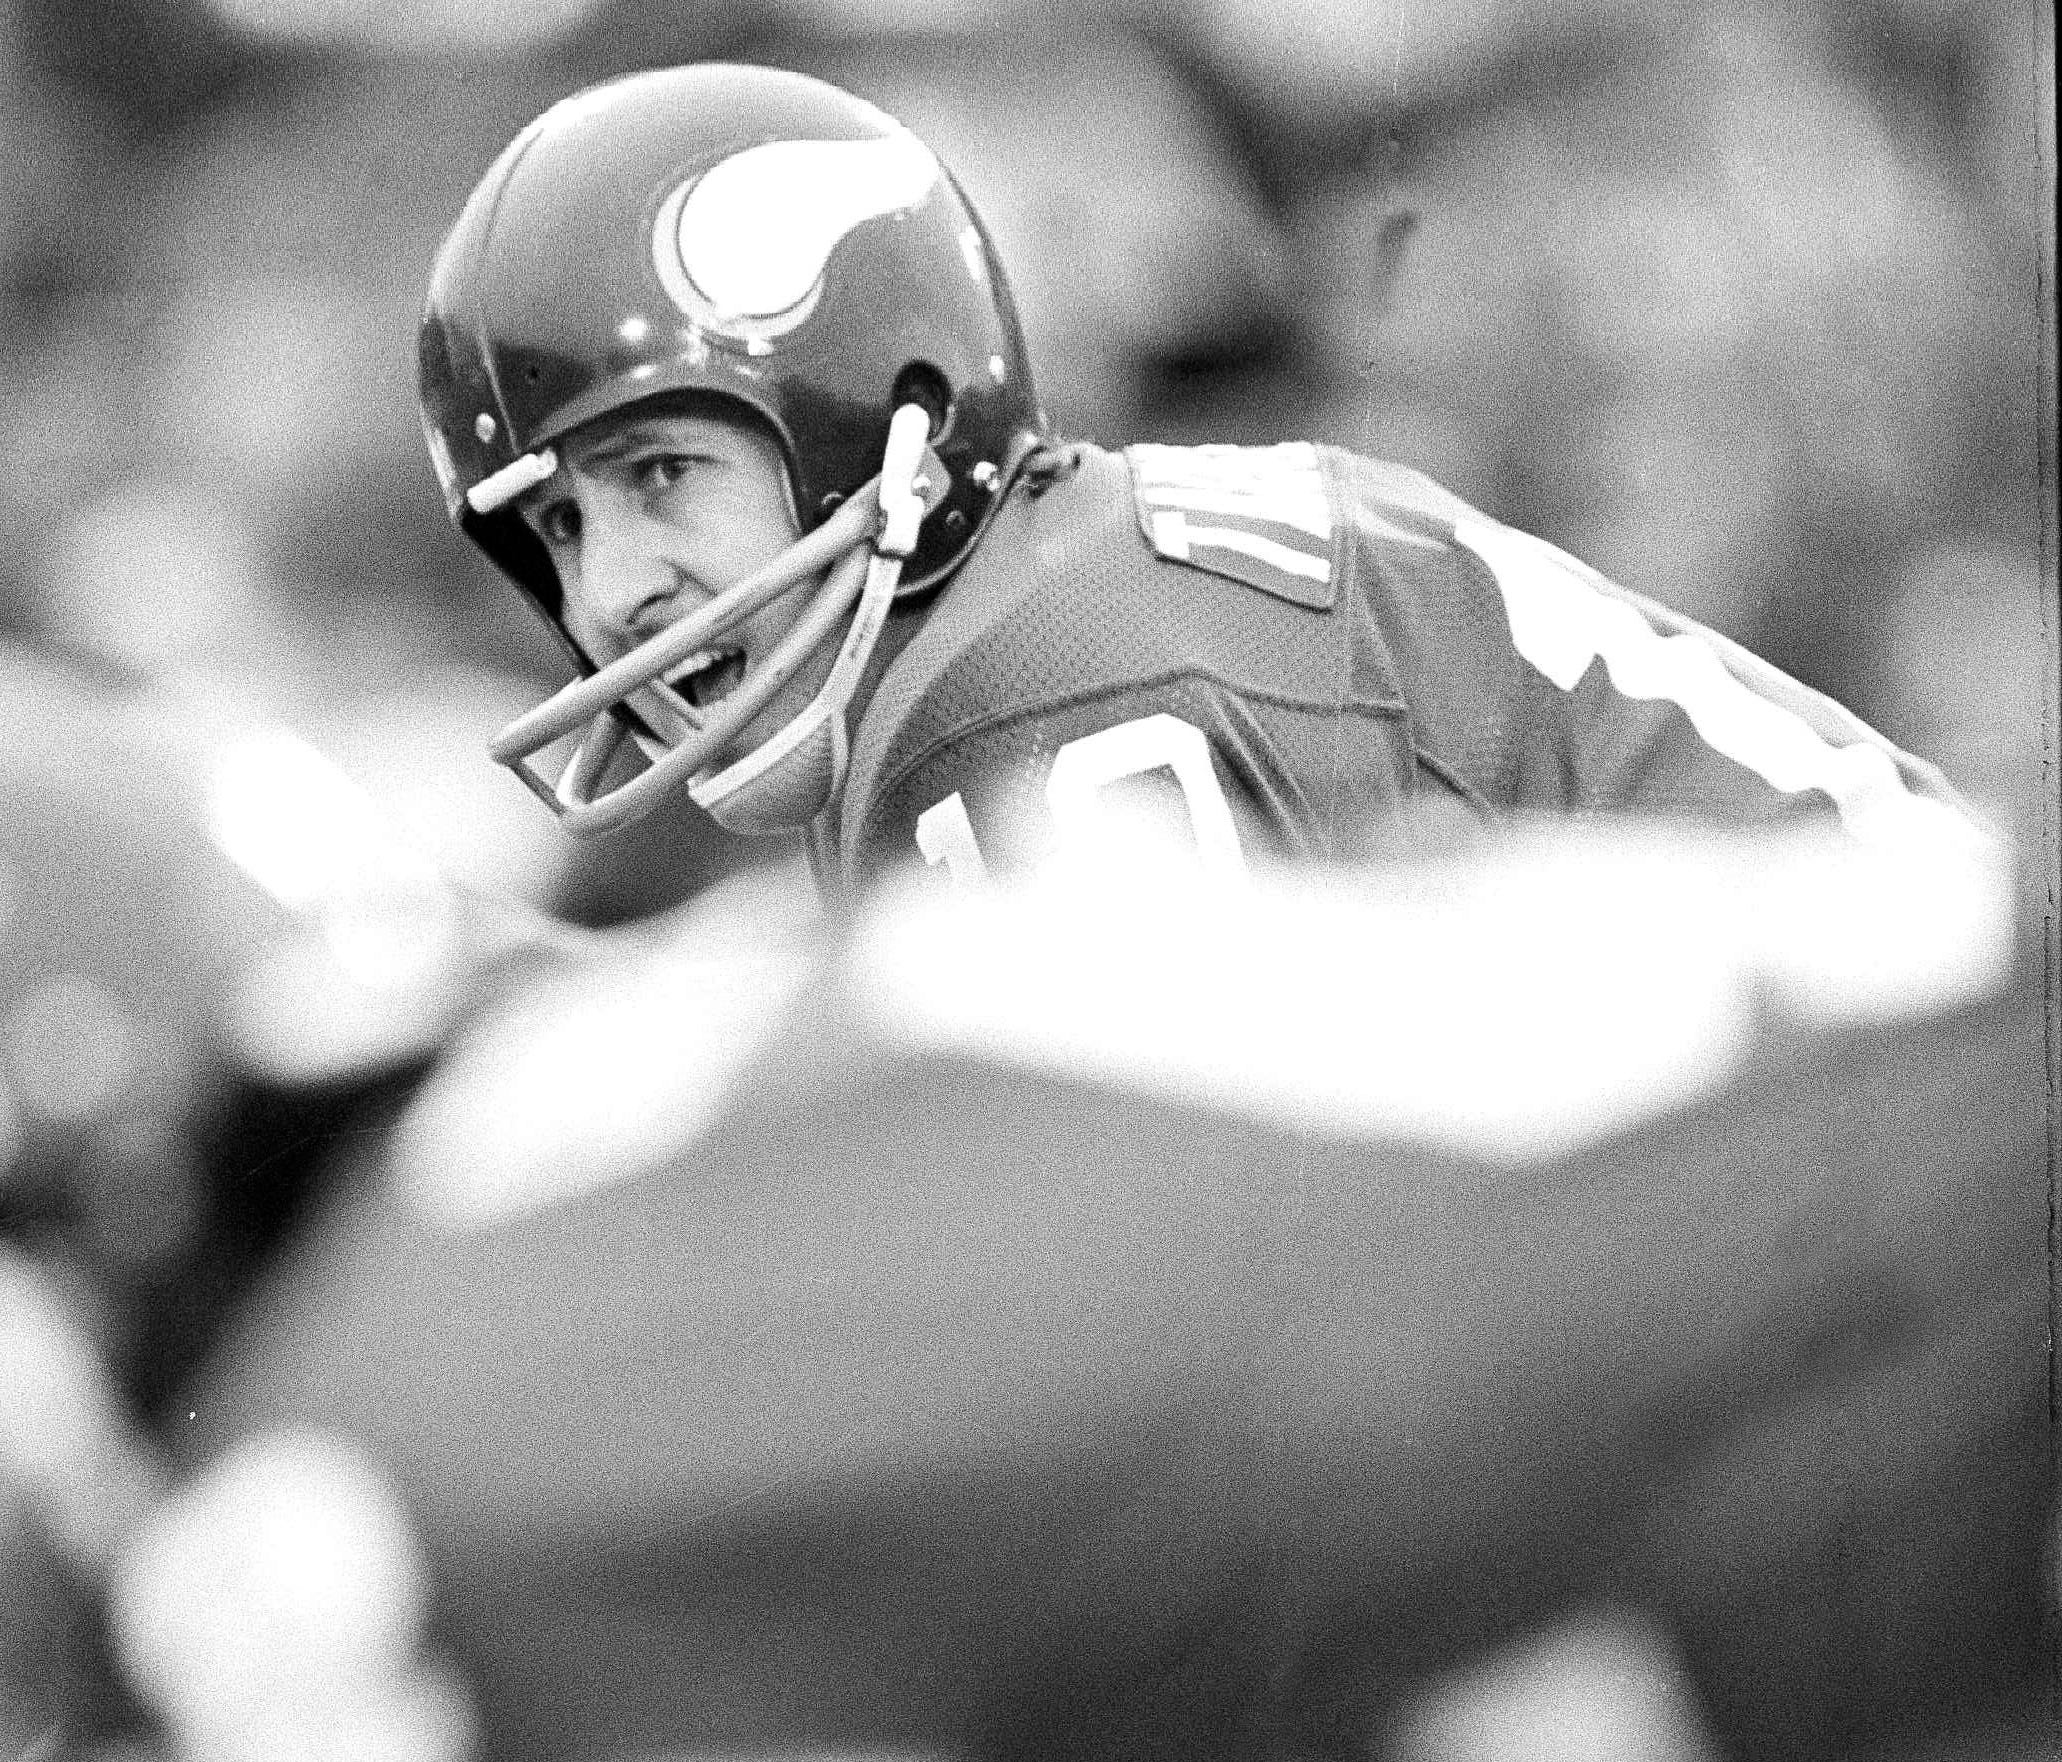 Former Minnesota Vikings QB Fran Tarkenton is never afraid to speak his mind when it comes to the NFL and the issues facing the league.